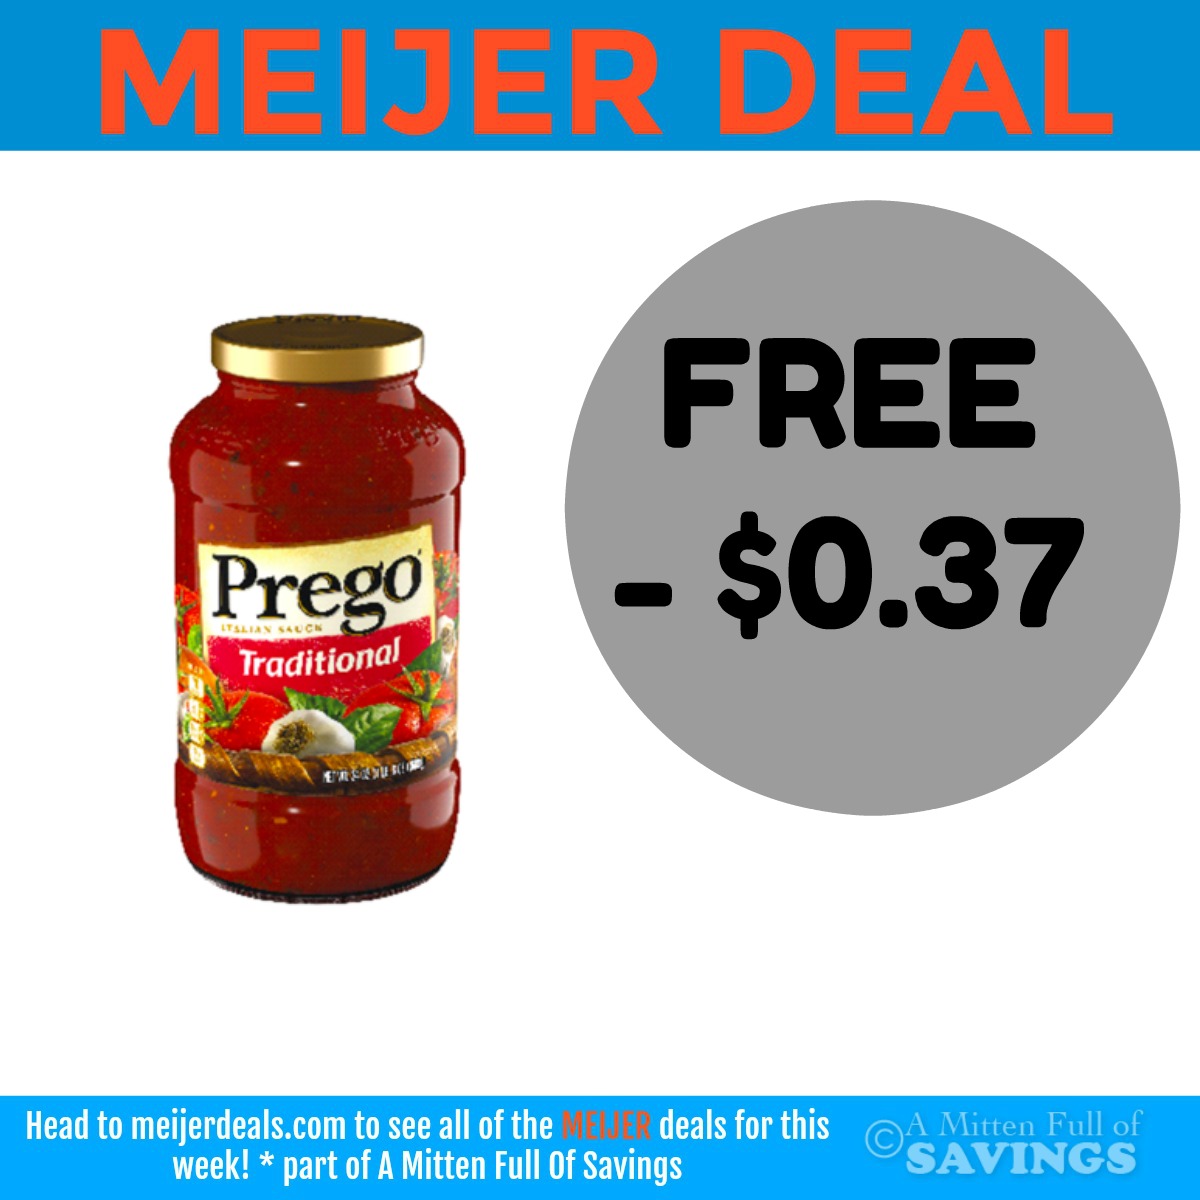 Meijer: FREE Prego Pasta Sauce this week + other deal ideas